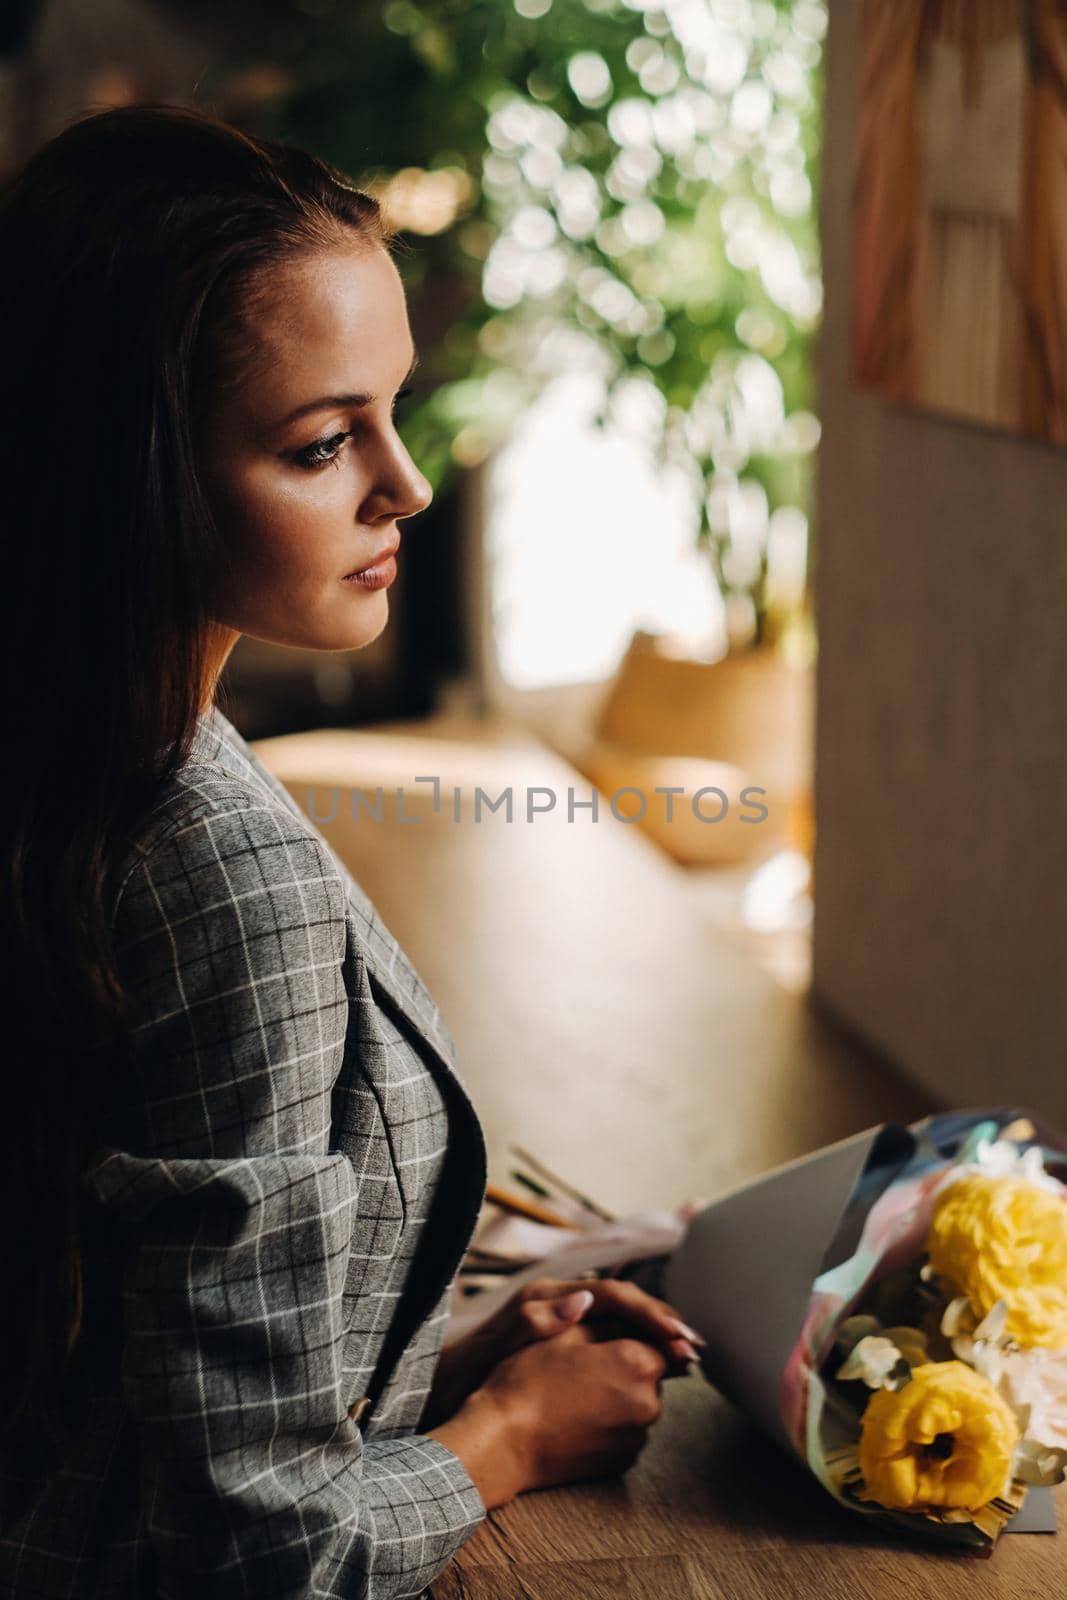 Portrait of a young European girl with long hair in a cafe with a bouquet standing near the window, a tall girl in a jacket with long hair in a cafe waiting.